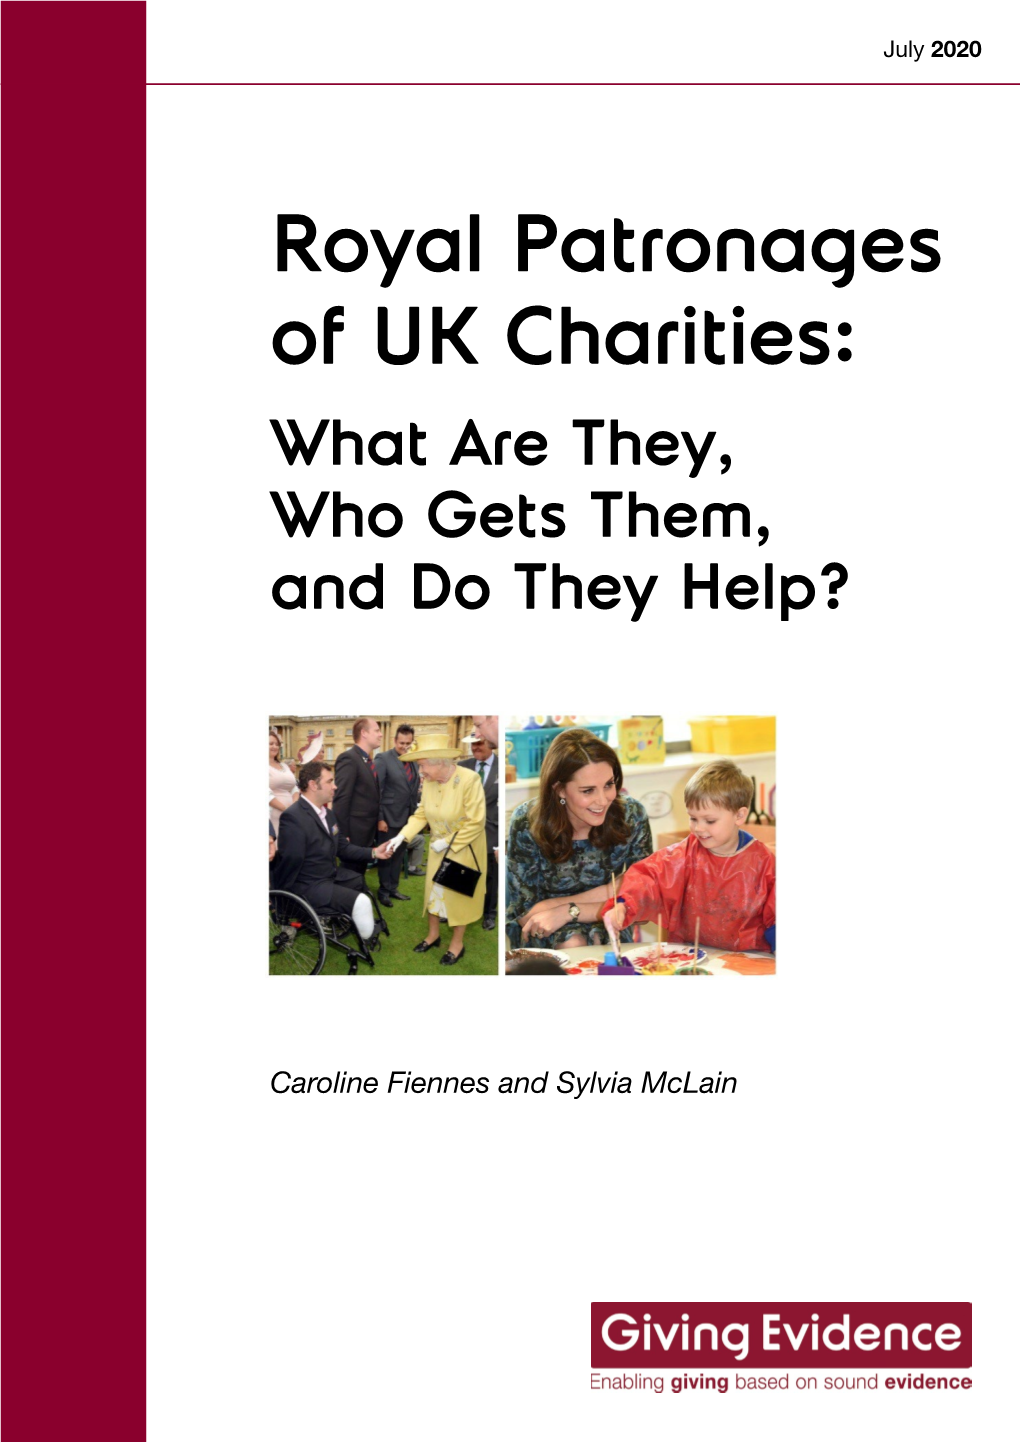 Royal Patronages of UK Charities: What Are They, Who Gets Them, and Do They Help?